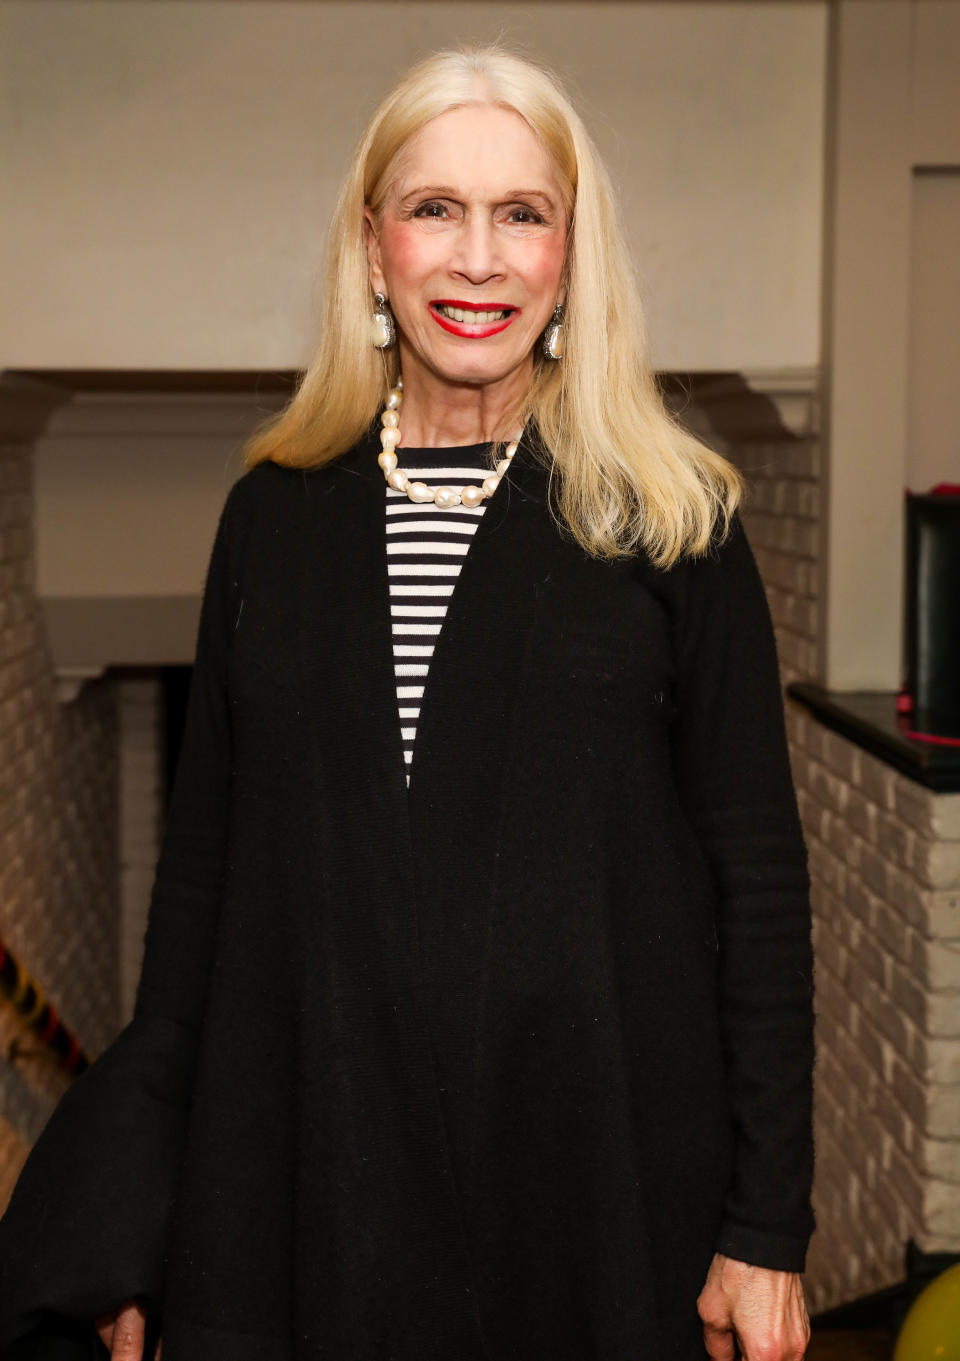 LONDON, ENGLAND - JUNE 05: Lady Colin Campbell attends the press night after party for "Education, Education, Education" at Walkers of Whitehall on June 5, 2019 in London, England. (Photo by David M. Benett/Dave Benett/Getty Images)